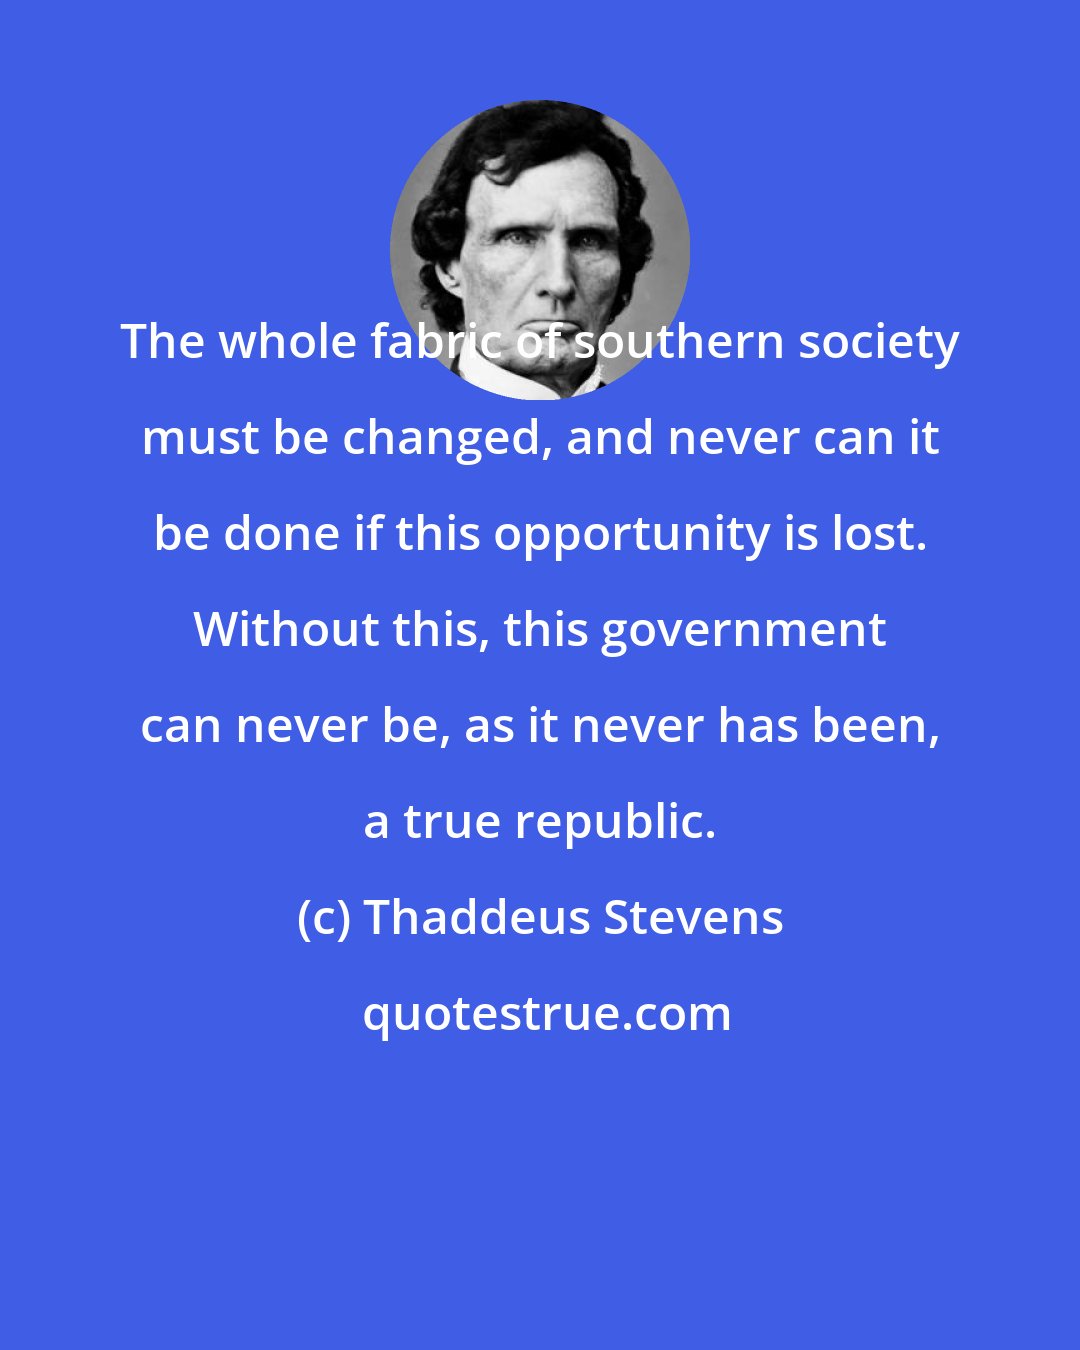 Thaddeus Stevens: The whole fabric of southern society must be changed, and never can it be done if this opportunity is lost. Without this, this government can never be, as it never has been, a true republic.